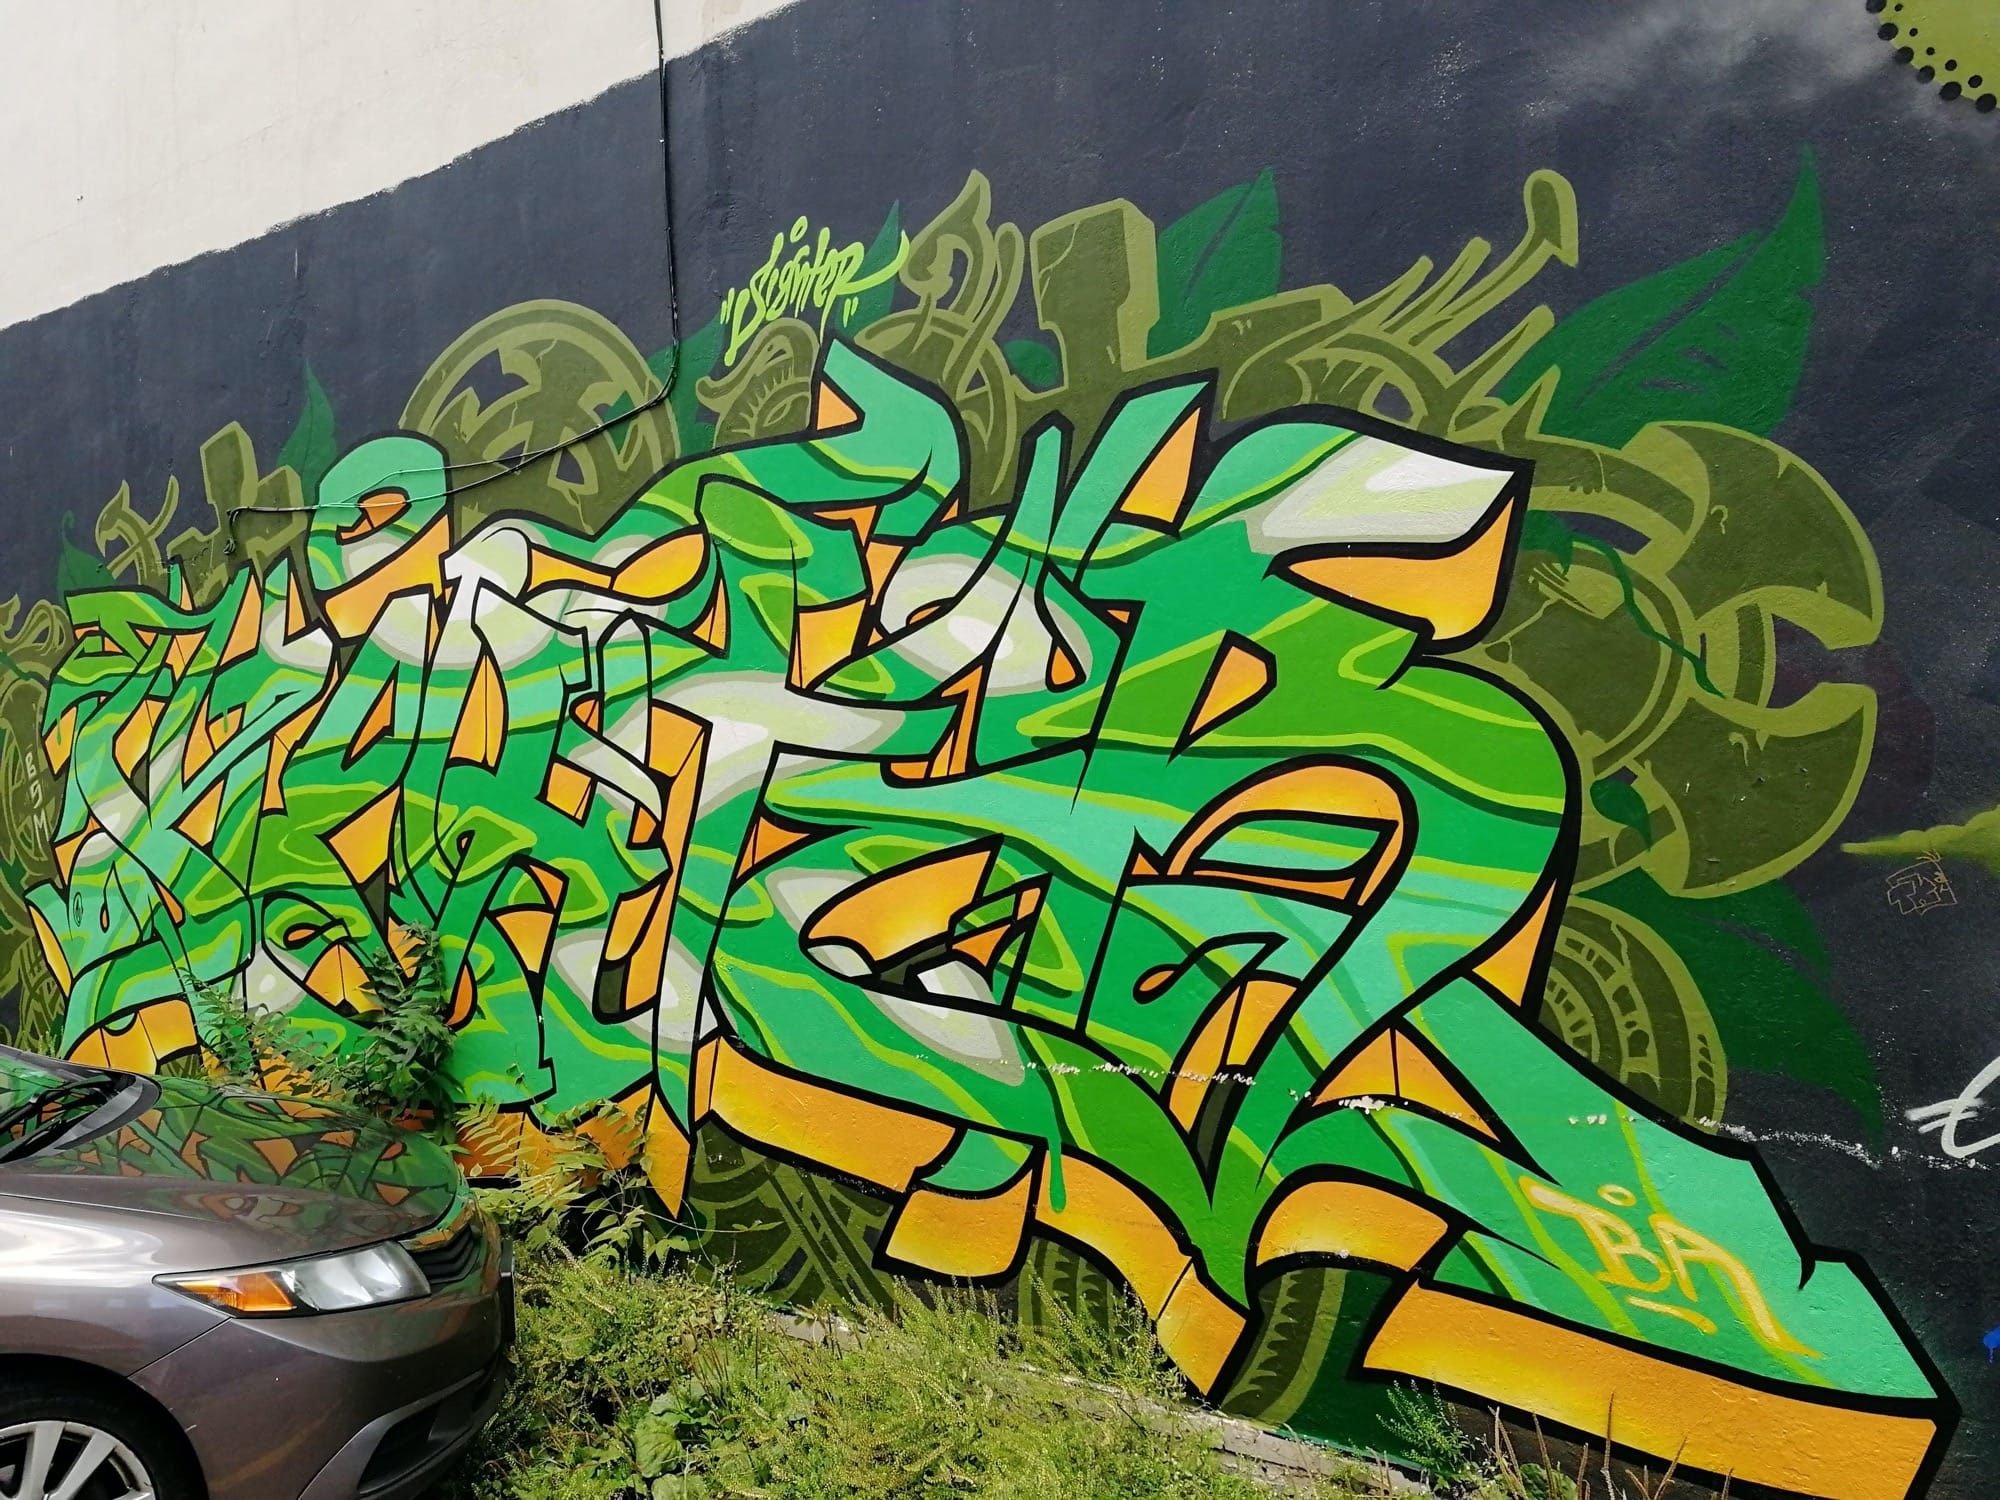 Graffiti 2465  captured by Rabot in Toronto Canada